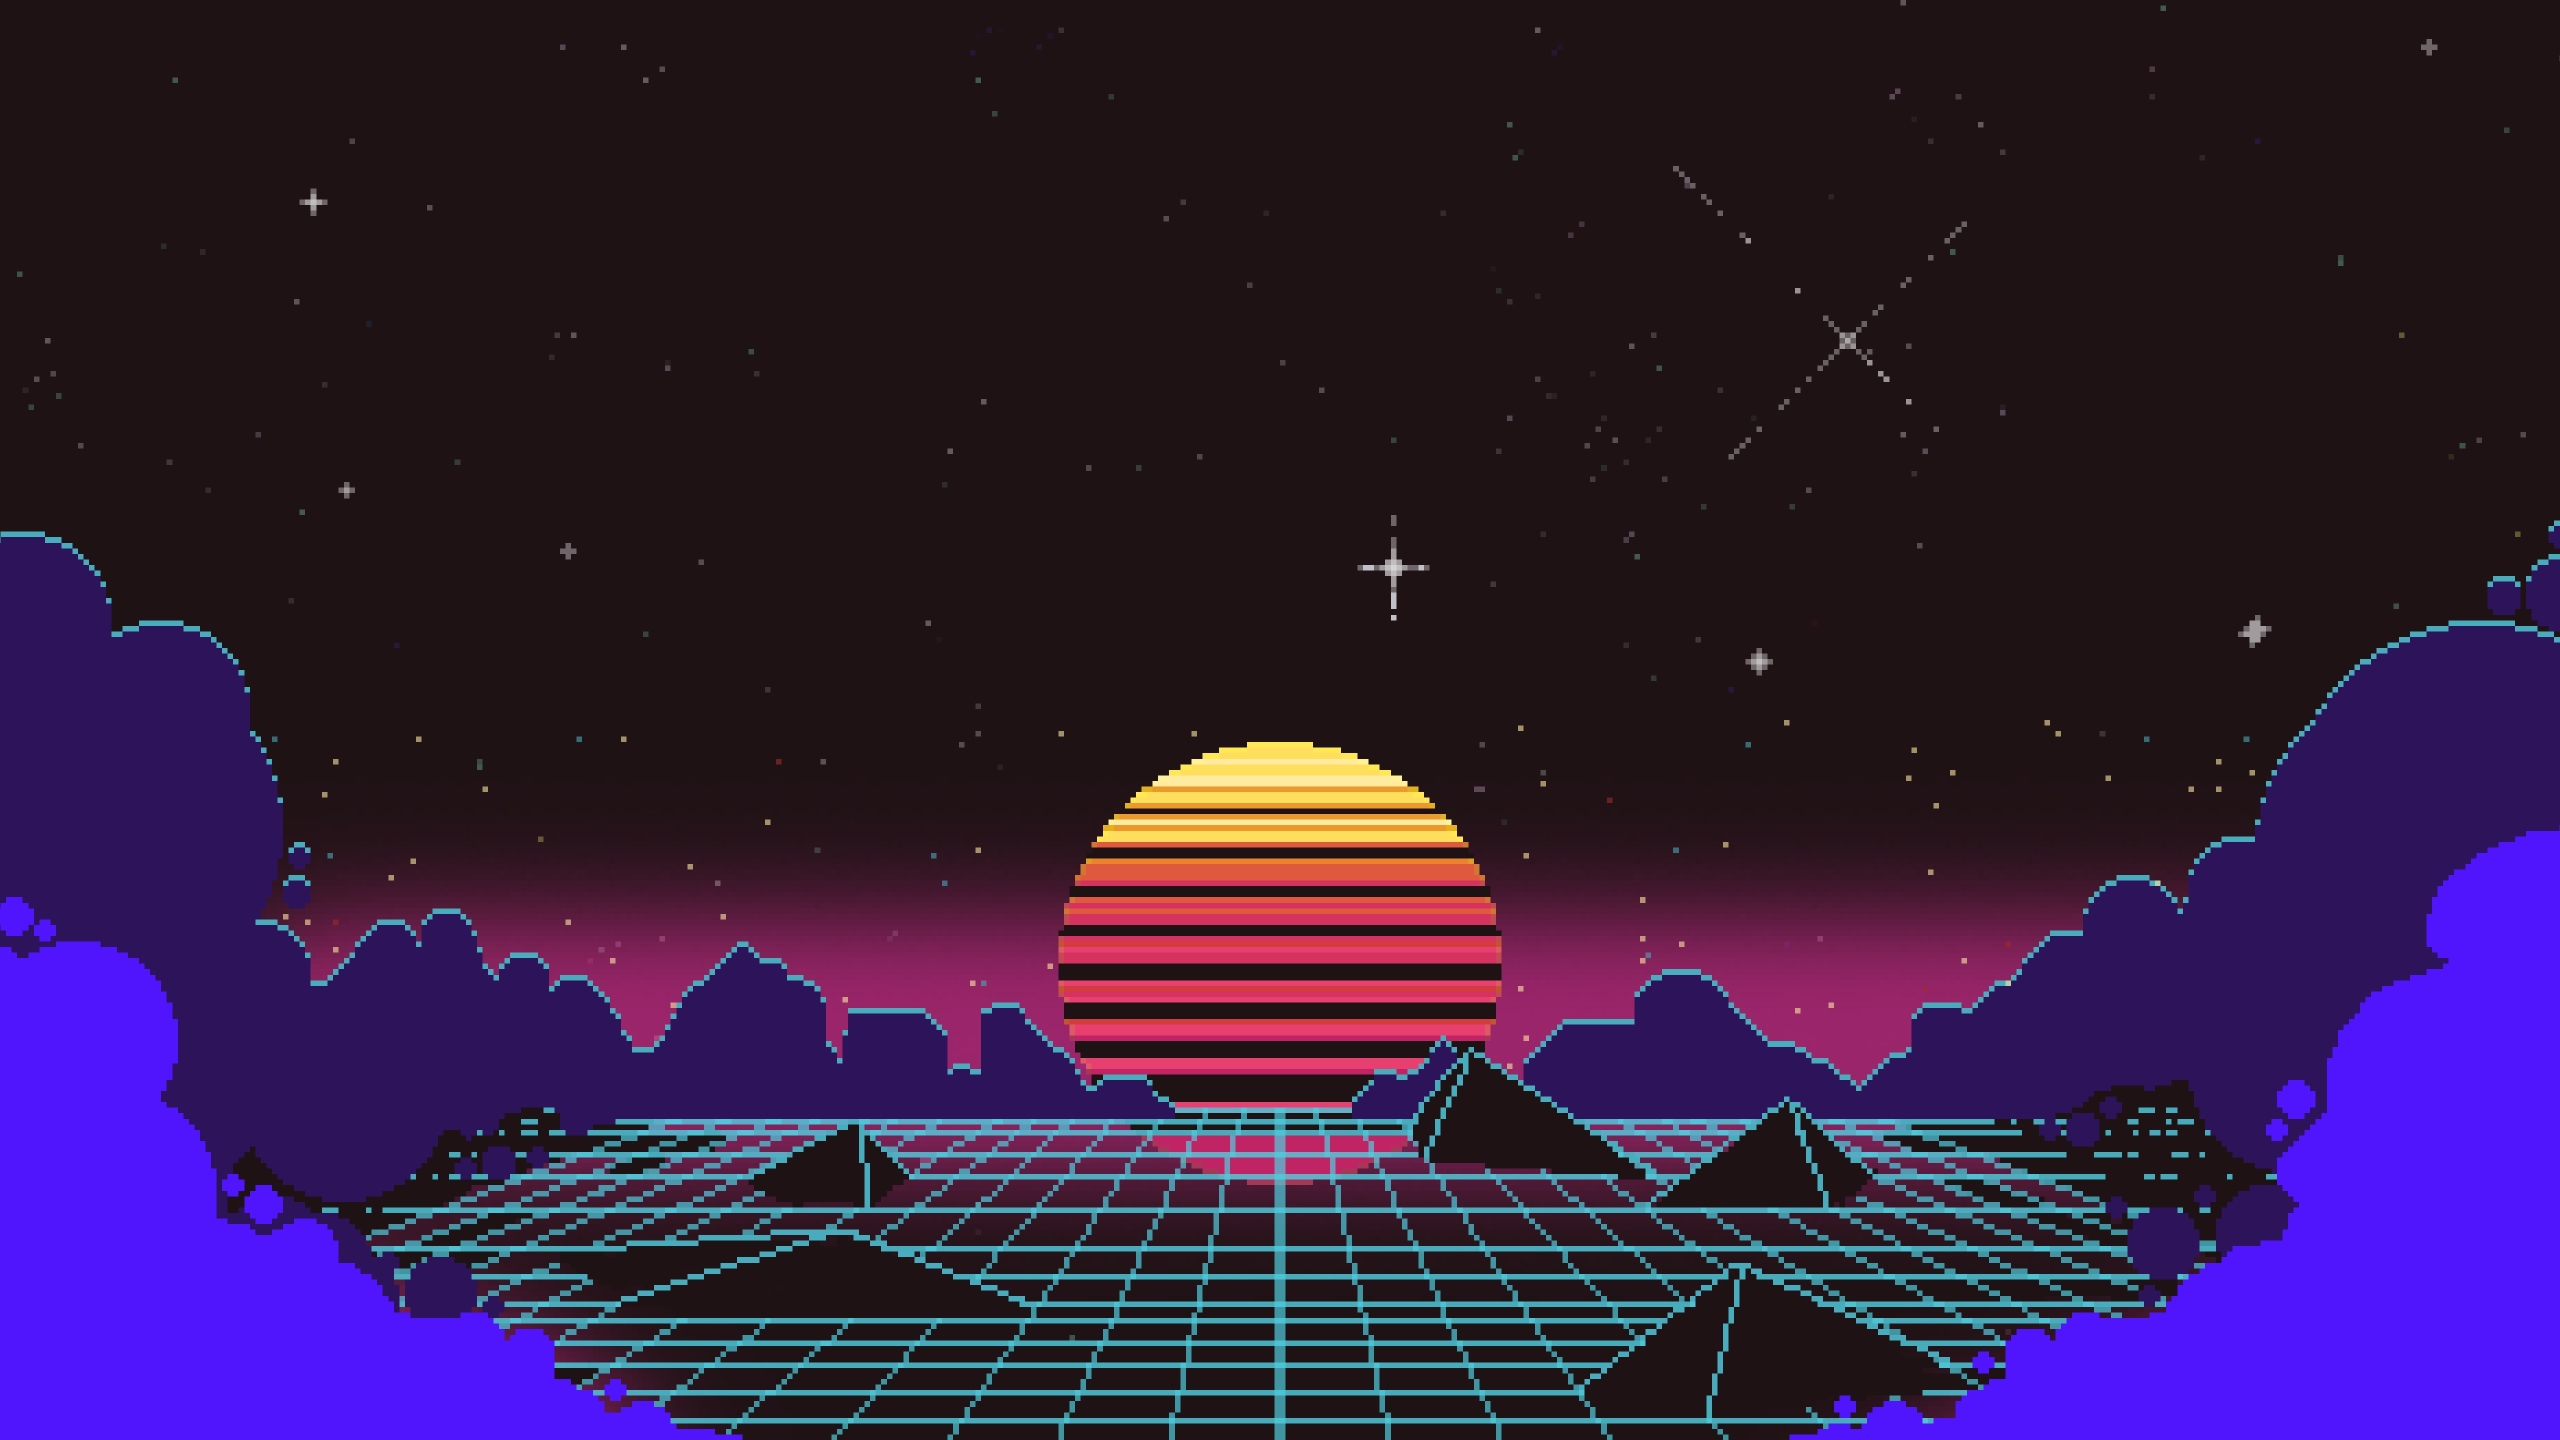 2560x1440 Outrun Pixel Sunset 1440p Resolution Wallpaper Hd Artist 4k Wallpapers Images Photos And Background